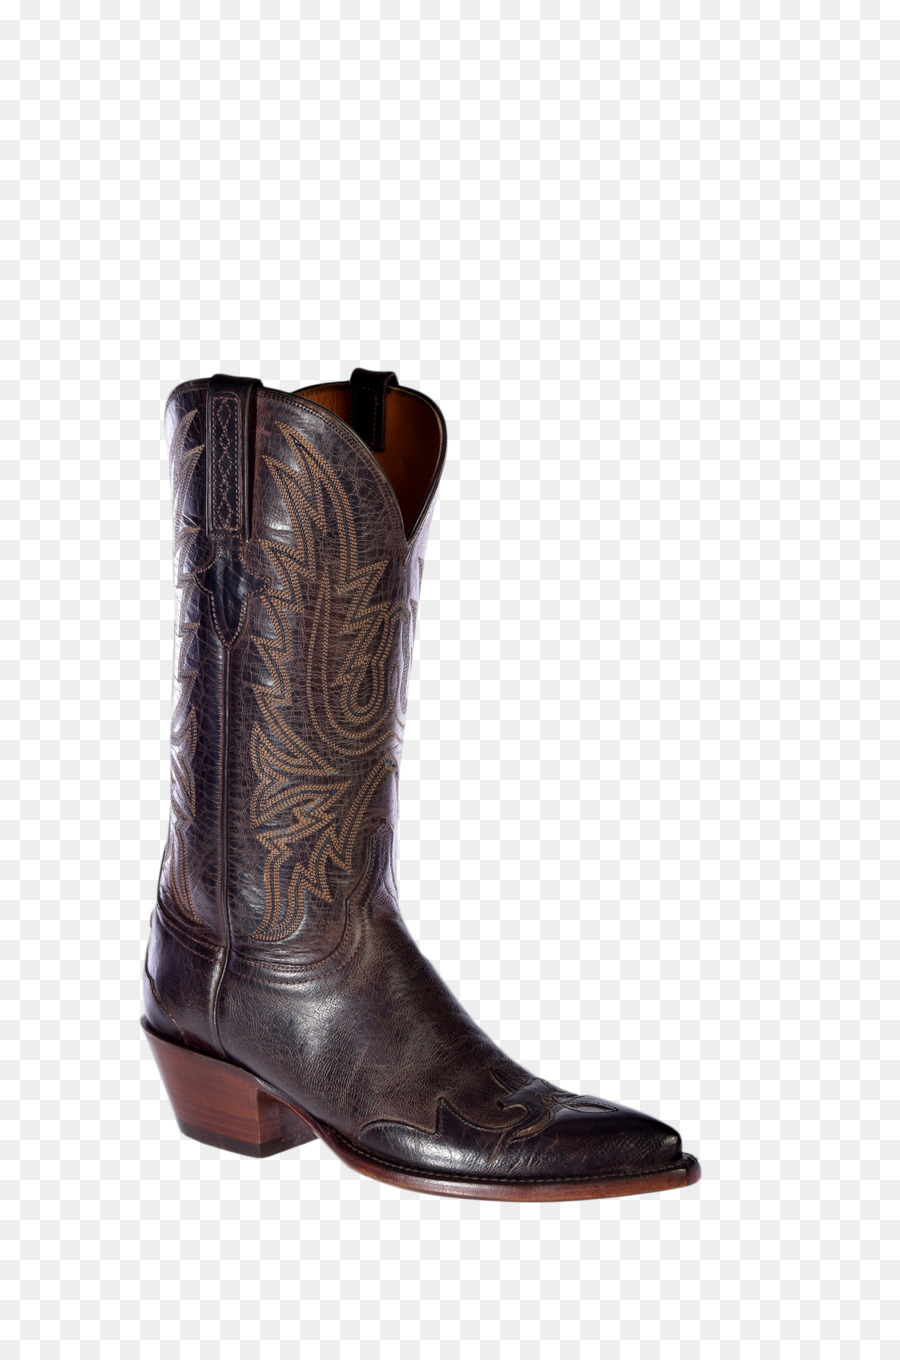 Cowboy Boot Shoe Leather Footwear   Boots - Cowboy Boots, Transparent background PNG HD thumbnail